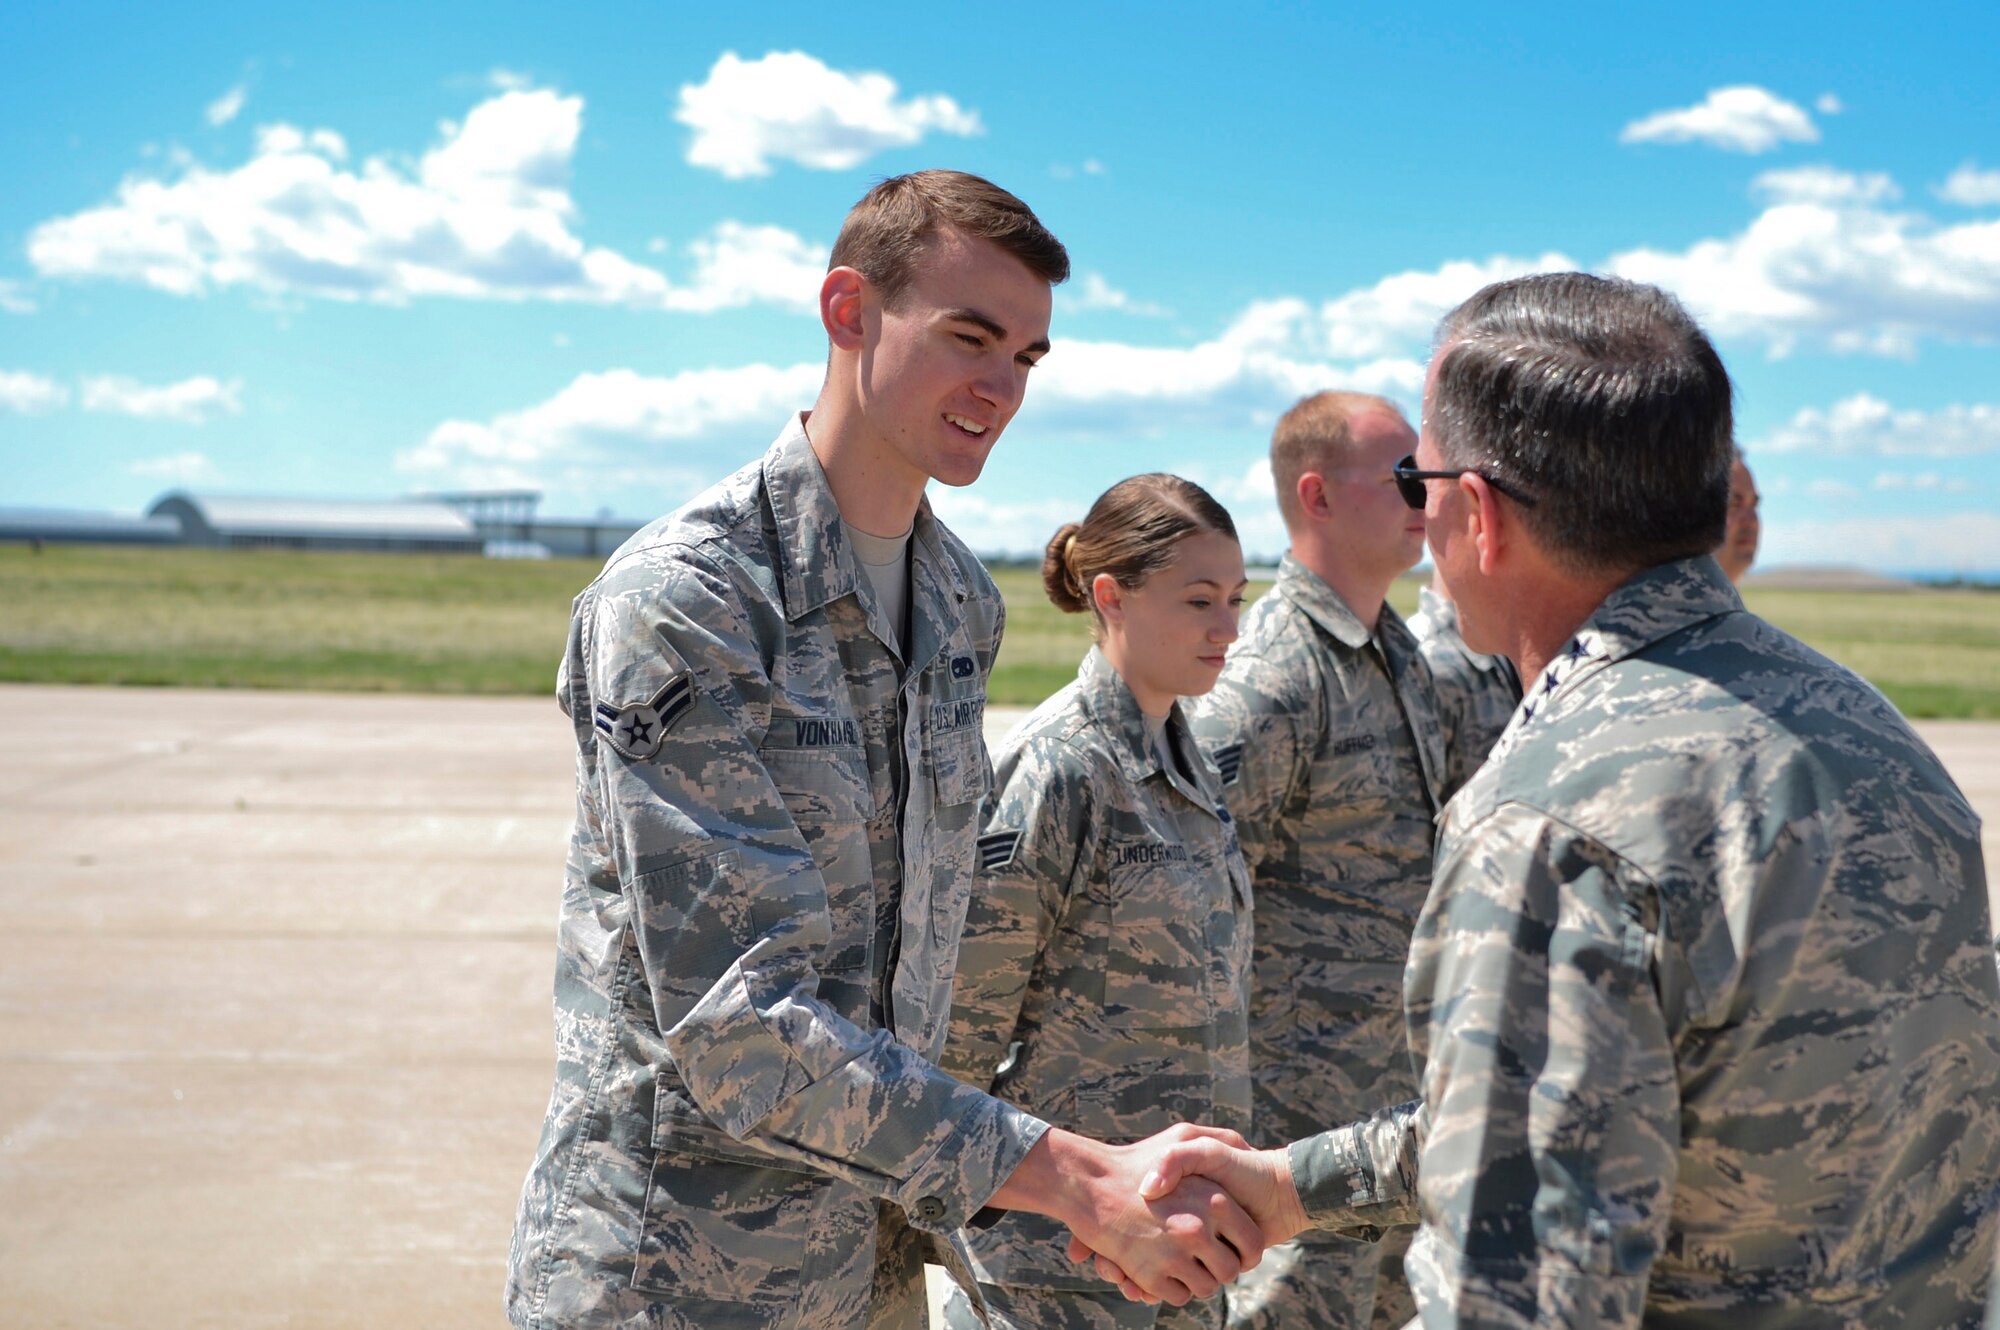 Gen. David L. Goldfein, Chief of Staff of the U.S. Air Force, gives Airman 1st Class Christopher Von Haasl, 140th Maintenance Squadron F-16 Fighting Falcon hydraulics technician, a coin in recognition of his hard work during his visit May 25, 2017, on Buckley Air Force Base, Colo. During his visit, Goldfein walked through several static displays for a mission brief from the 140th Wing, met with space operators from the 460th Operations Group and toured the Aerospace Data Facility-Colorado. (U.S. Air Force photo by Airman 1st Class Holden S. Faul/ Released)